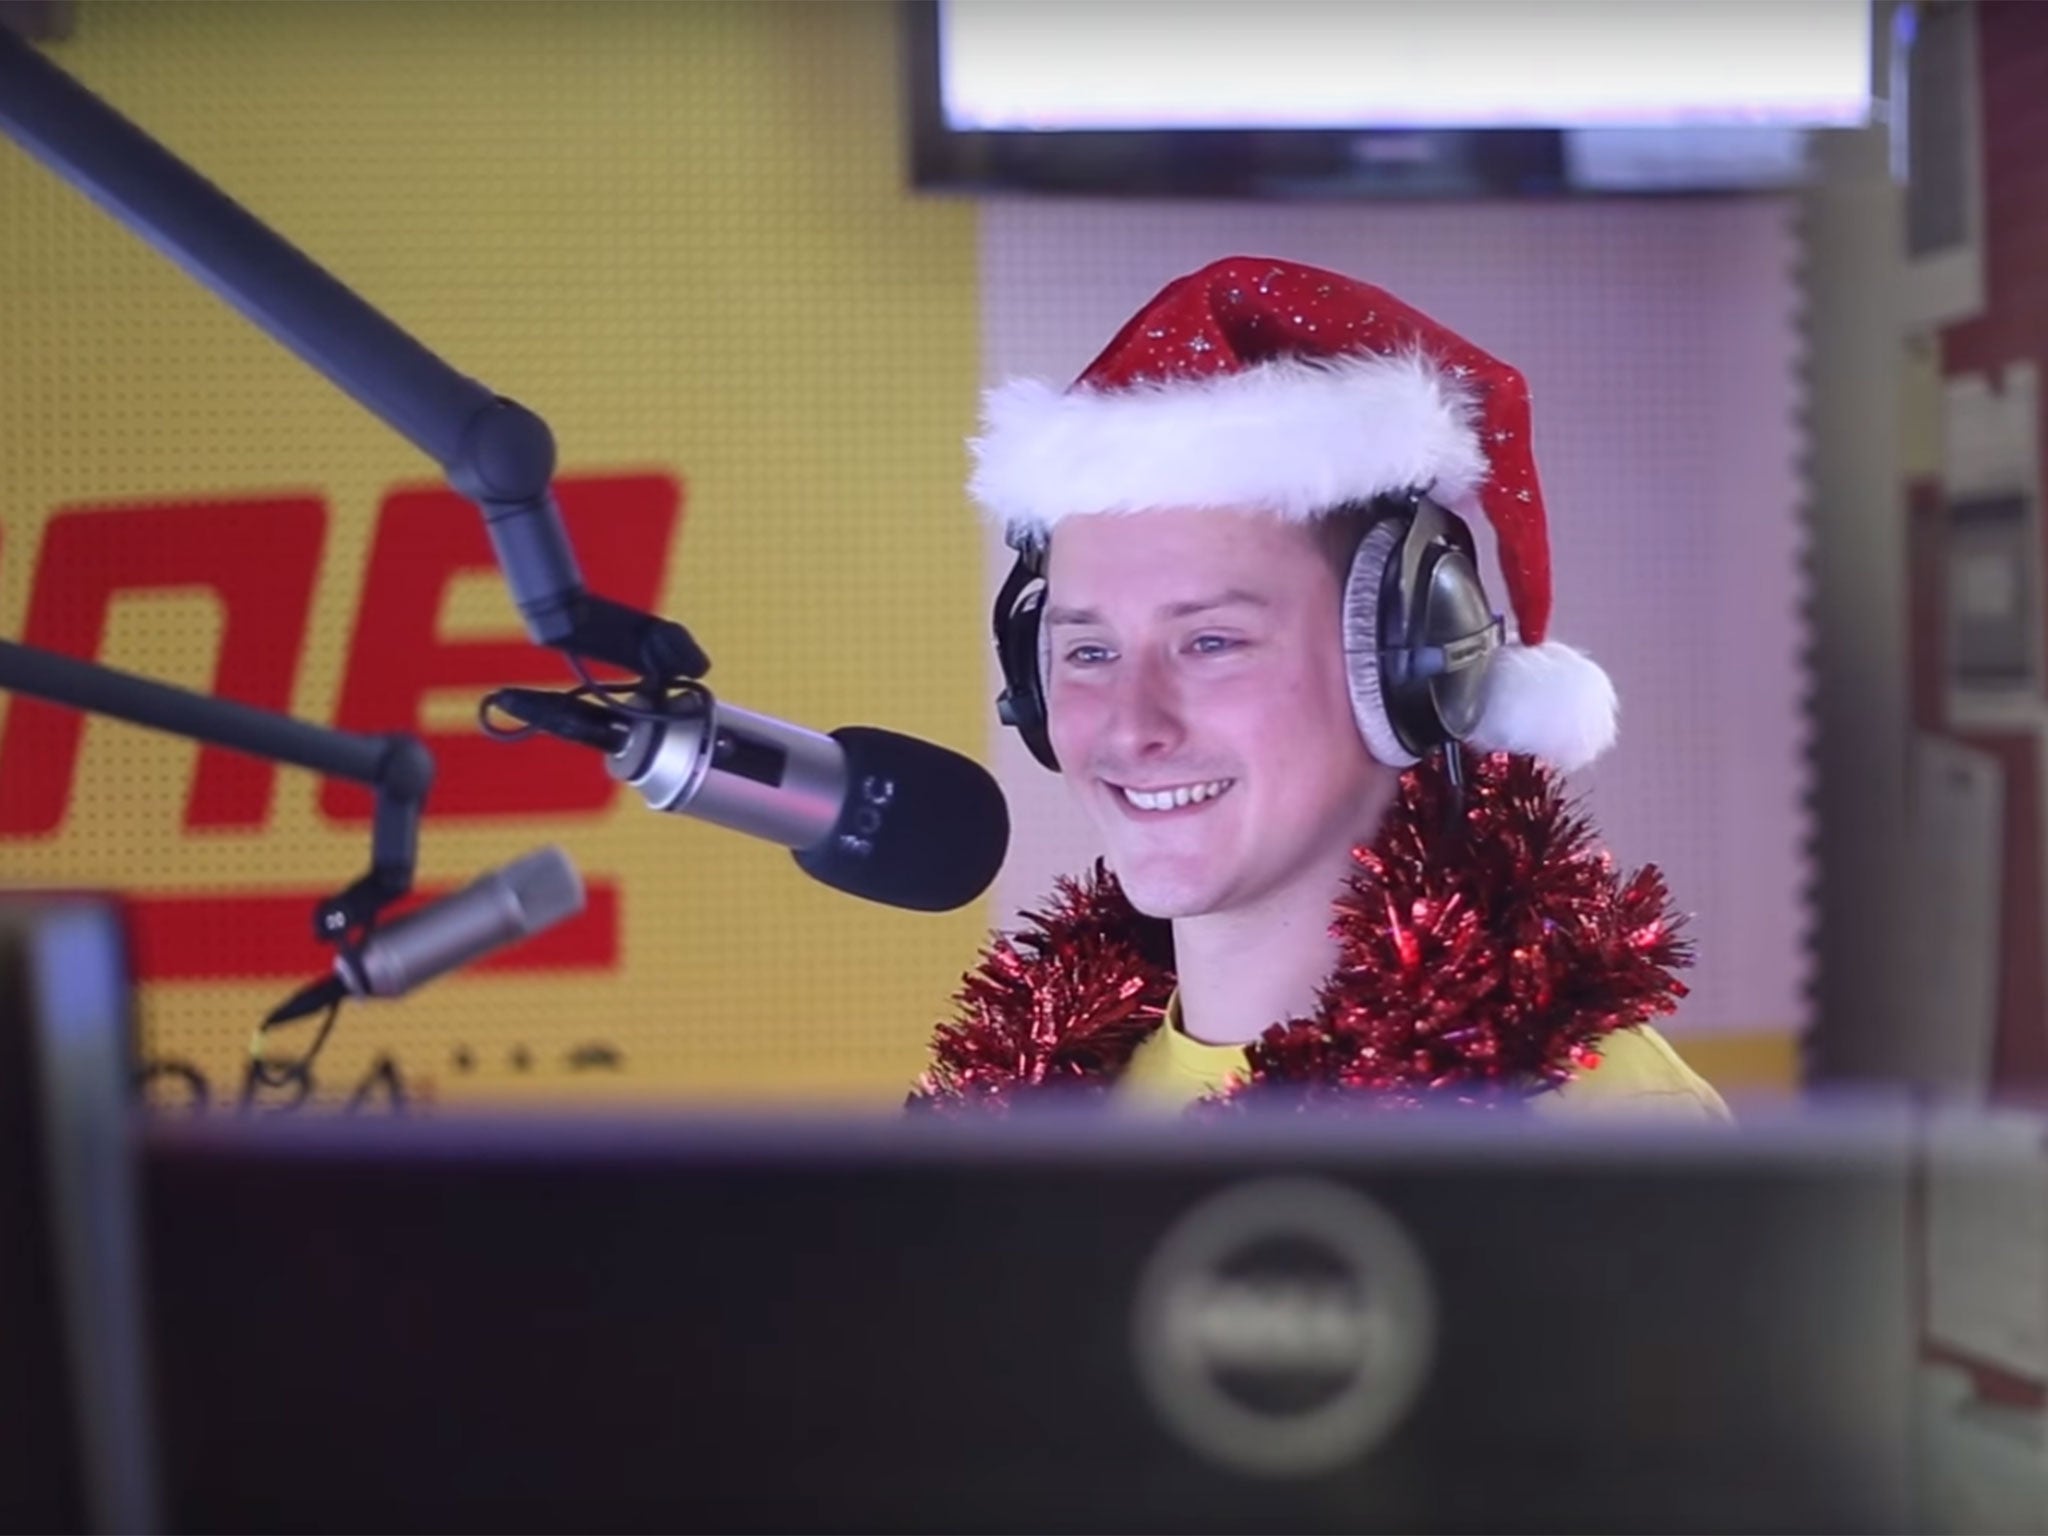 Joe Kohlhofer's co-host and producers were locked out of the studio for almost two hours while he played the Last Christmas marathon